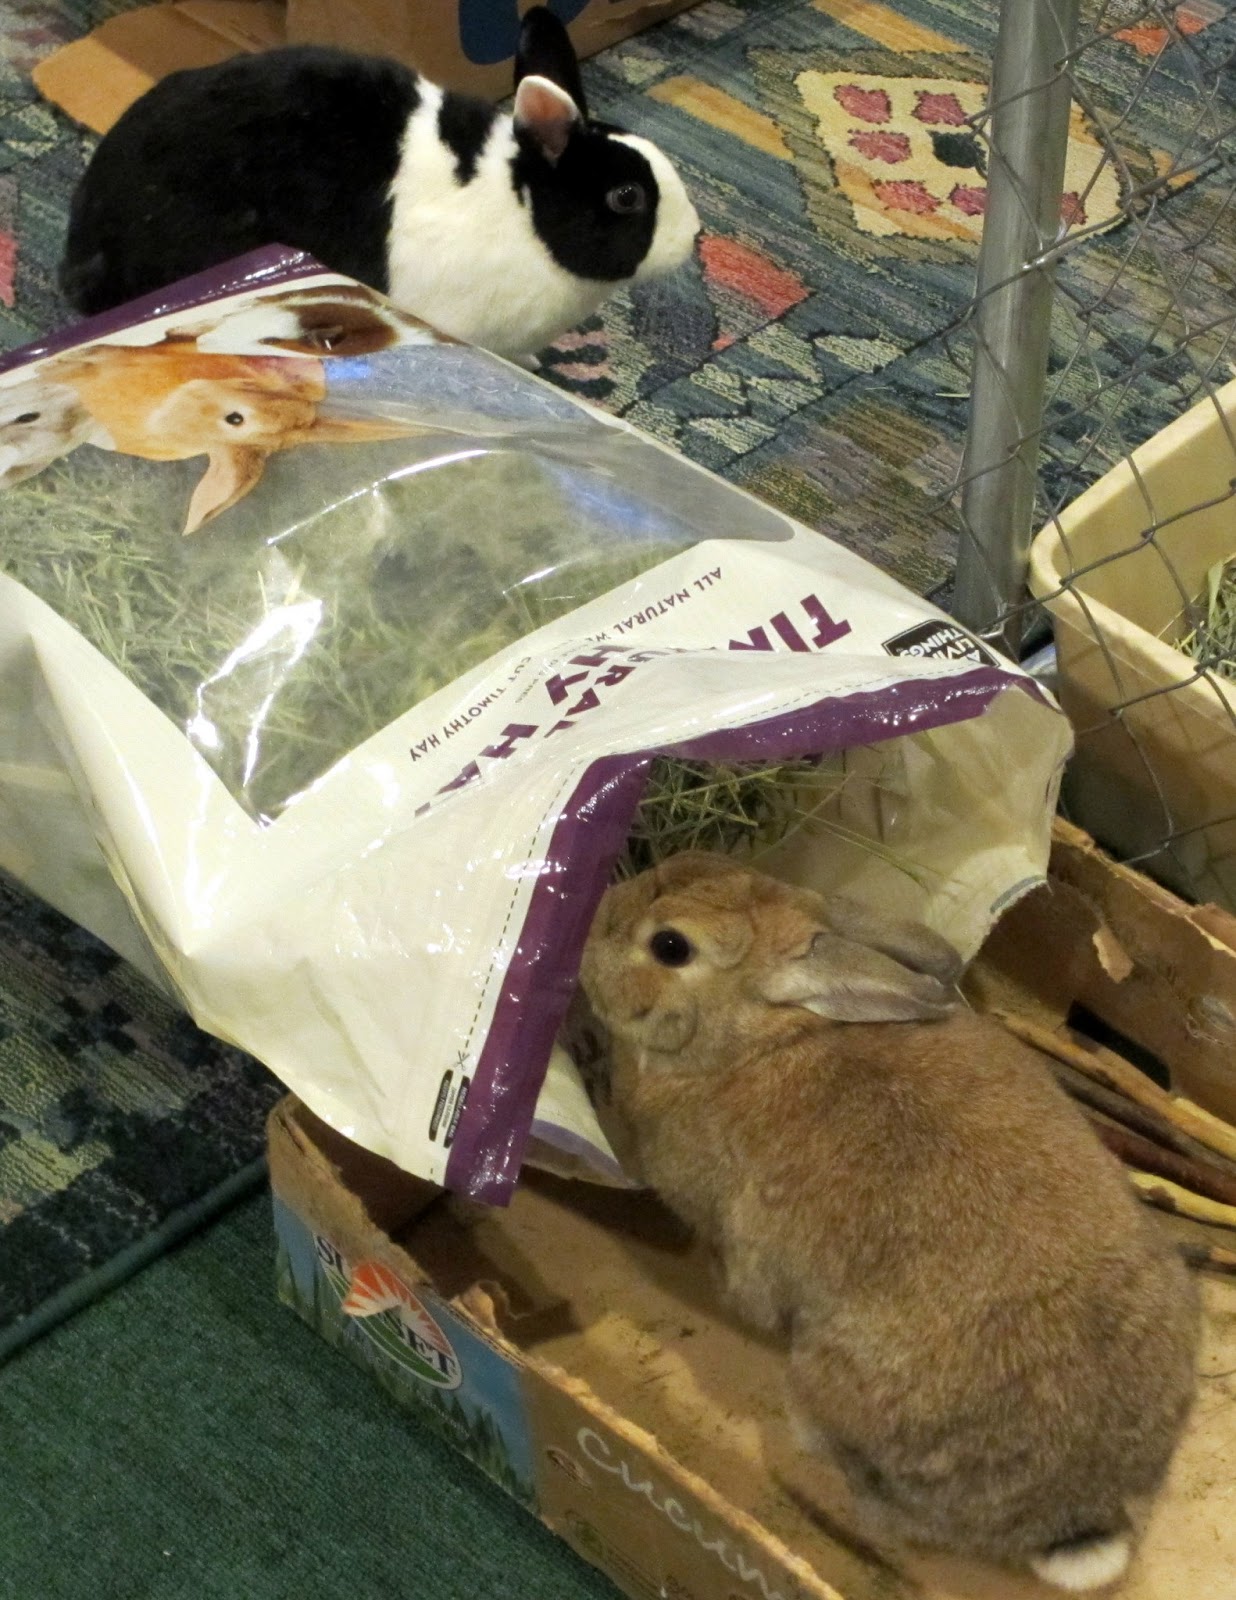 ... Ramblings: Do you save toilet paper tubes? For the bunnies, I mean